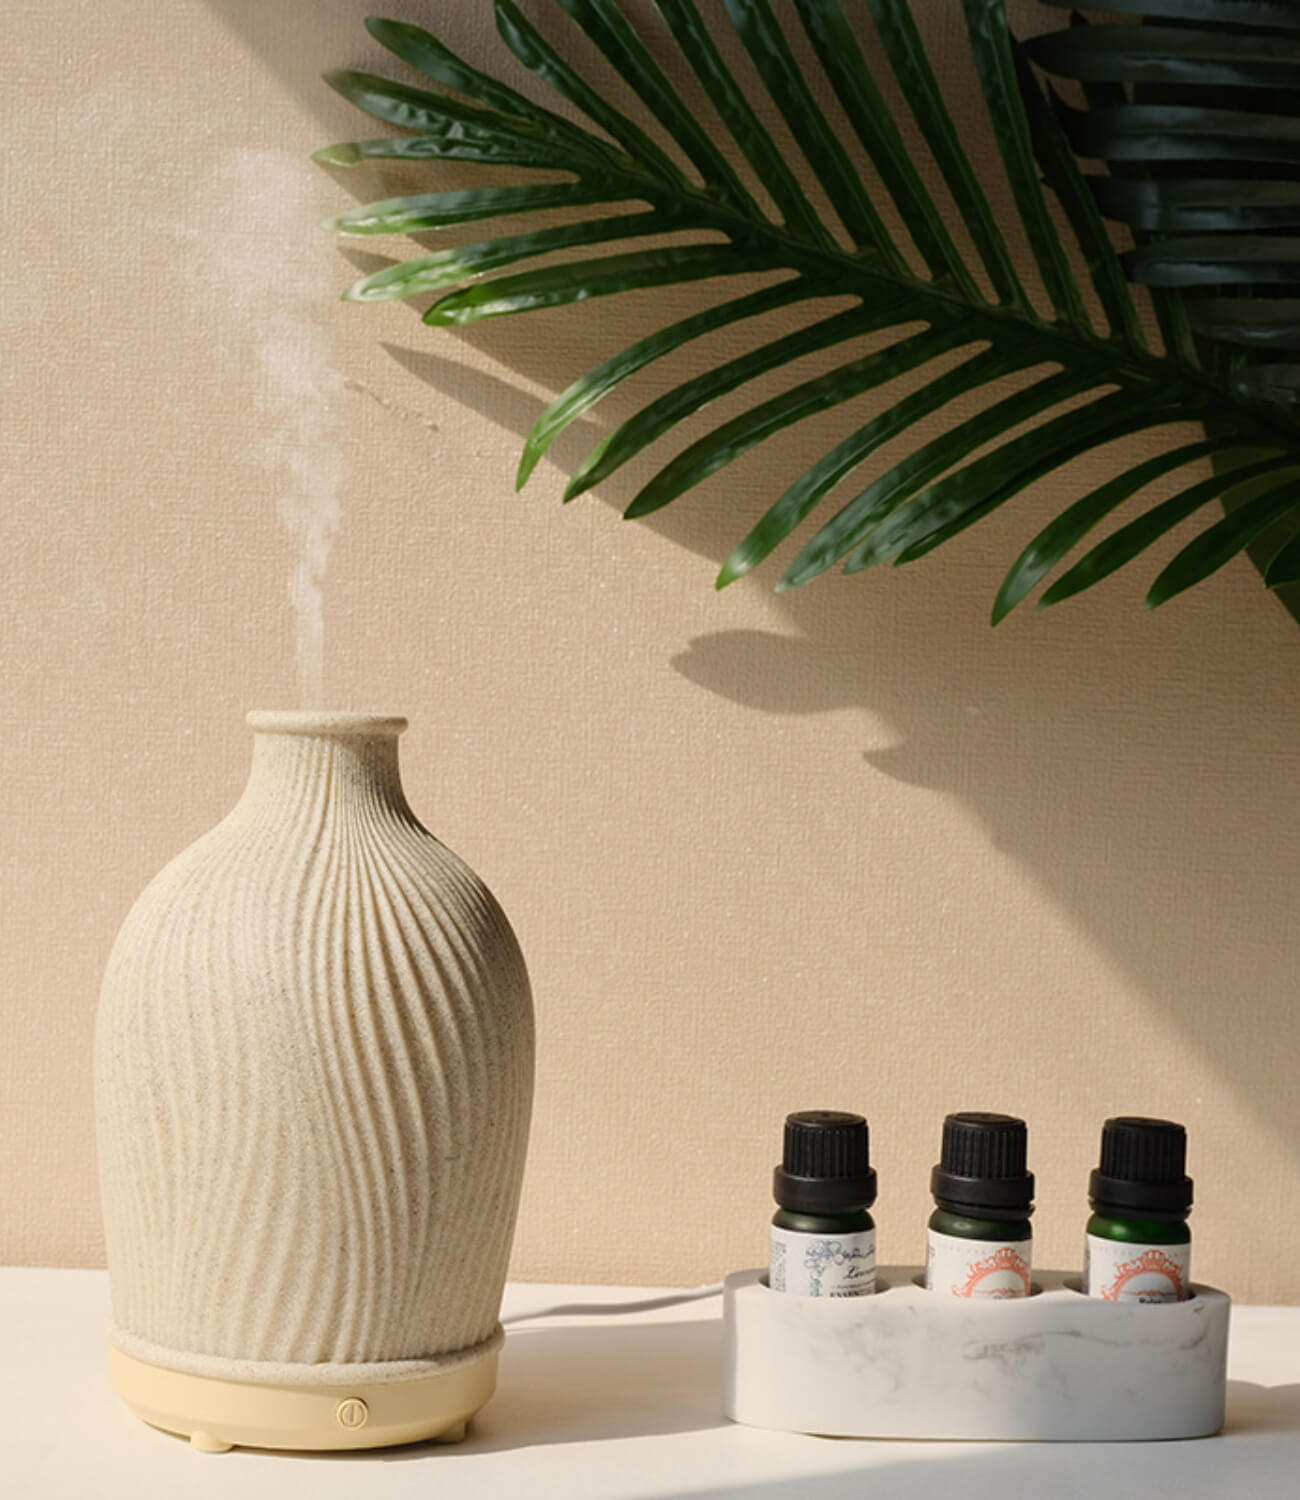 SereneVase Diffuser: Blending art and practicality, it brings a serene aromatic experience to your space.